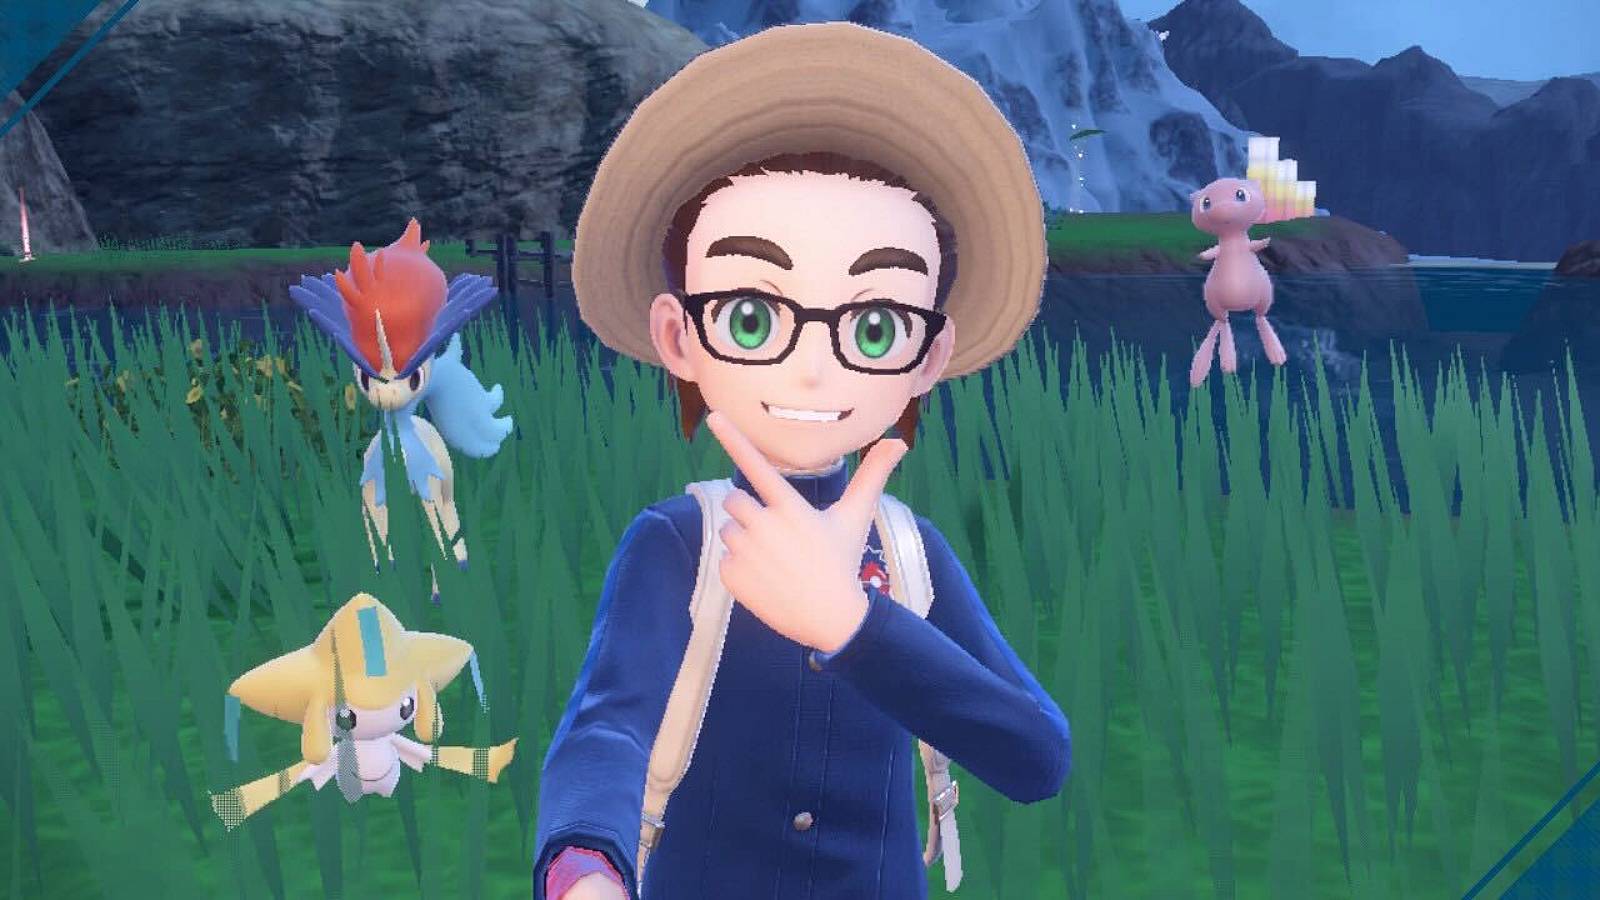 A Pokemon trainer poses for a selfie in front of several mythical Pokemon